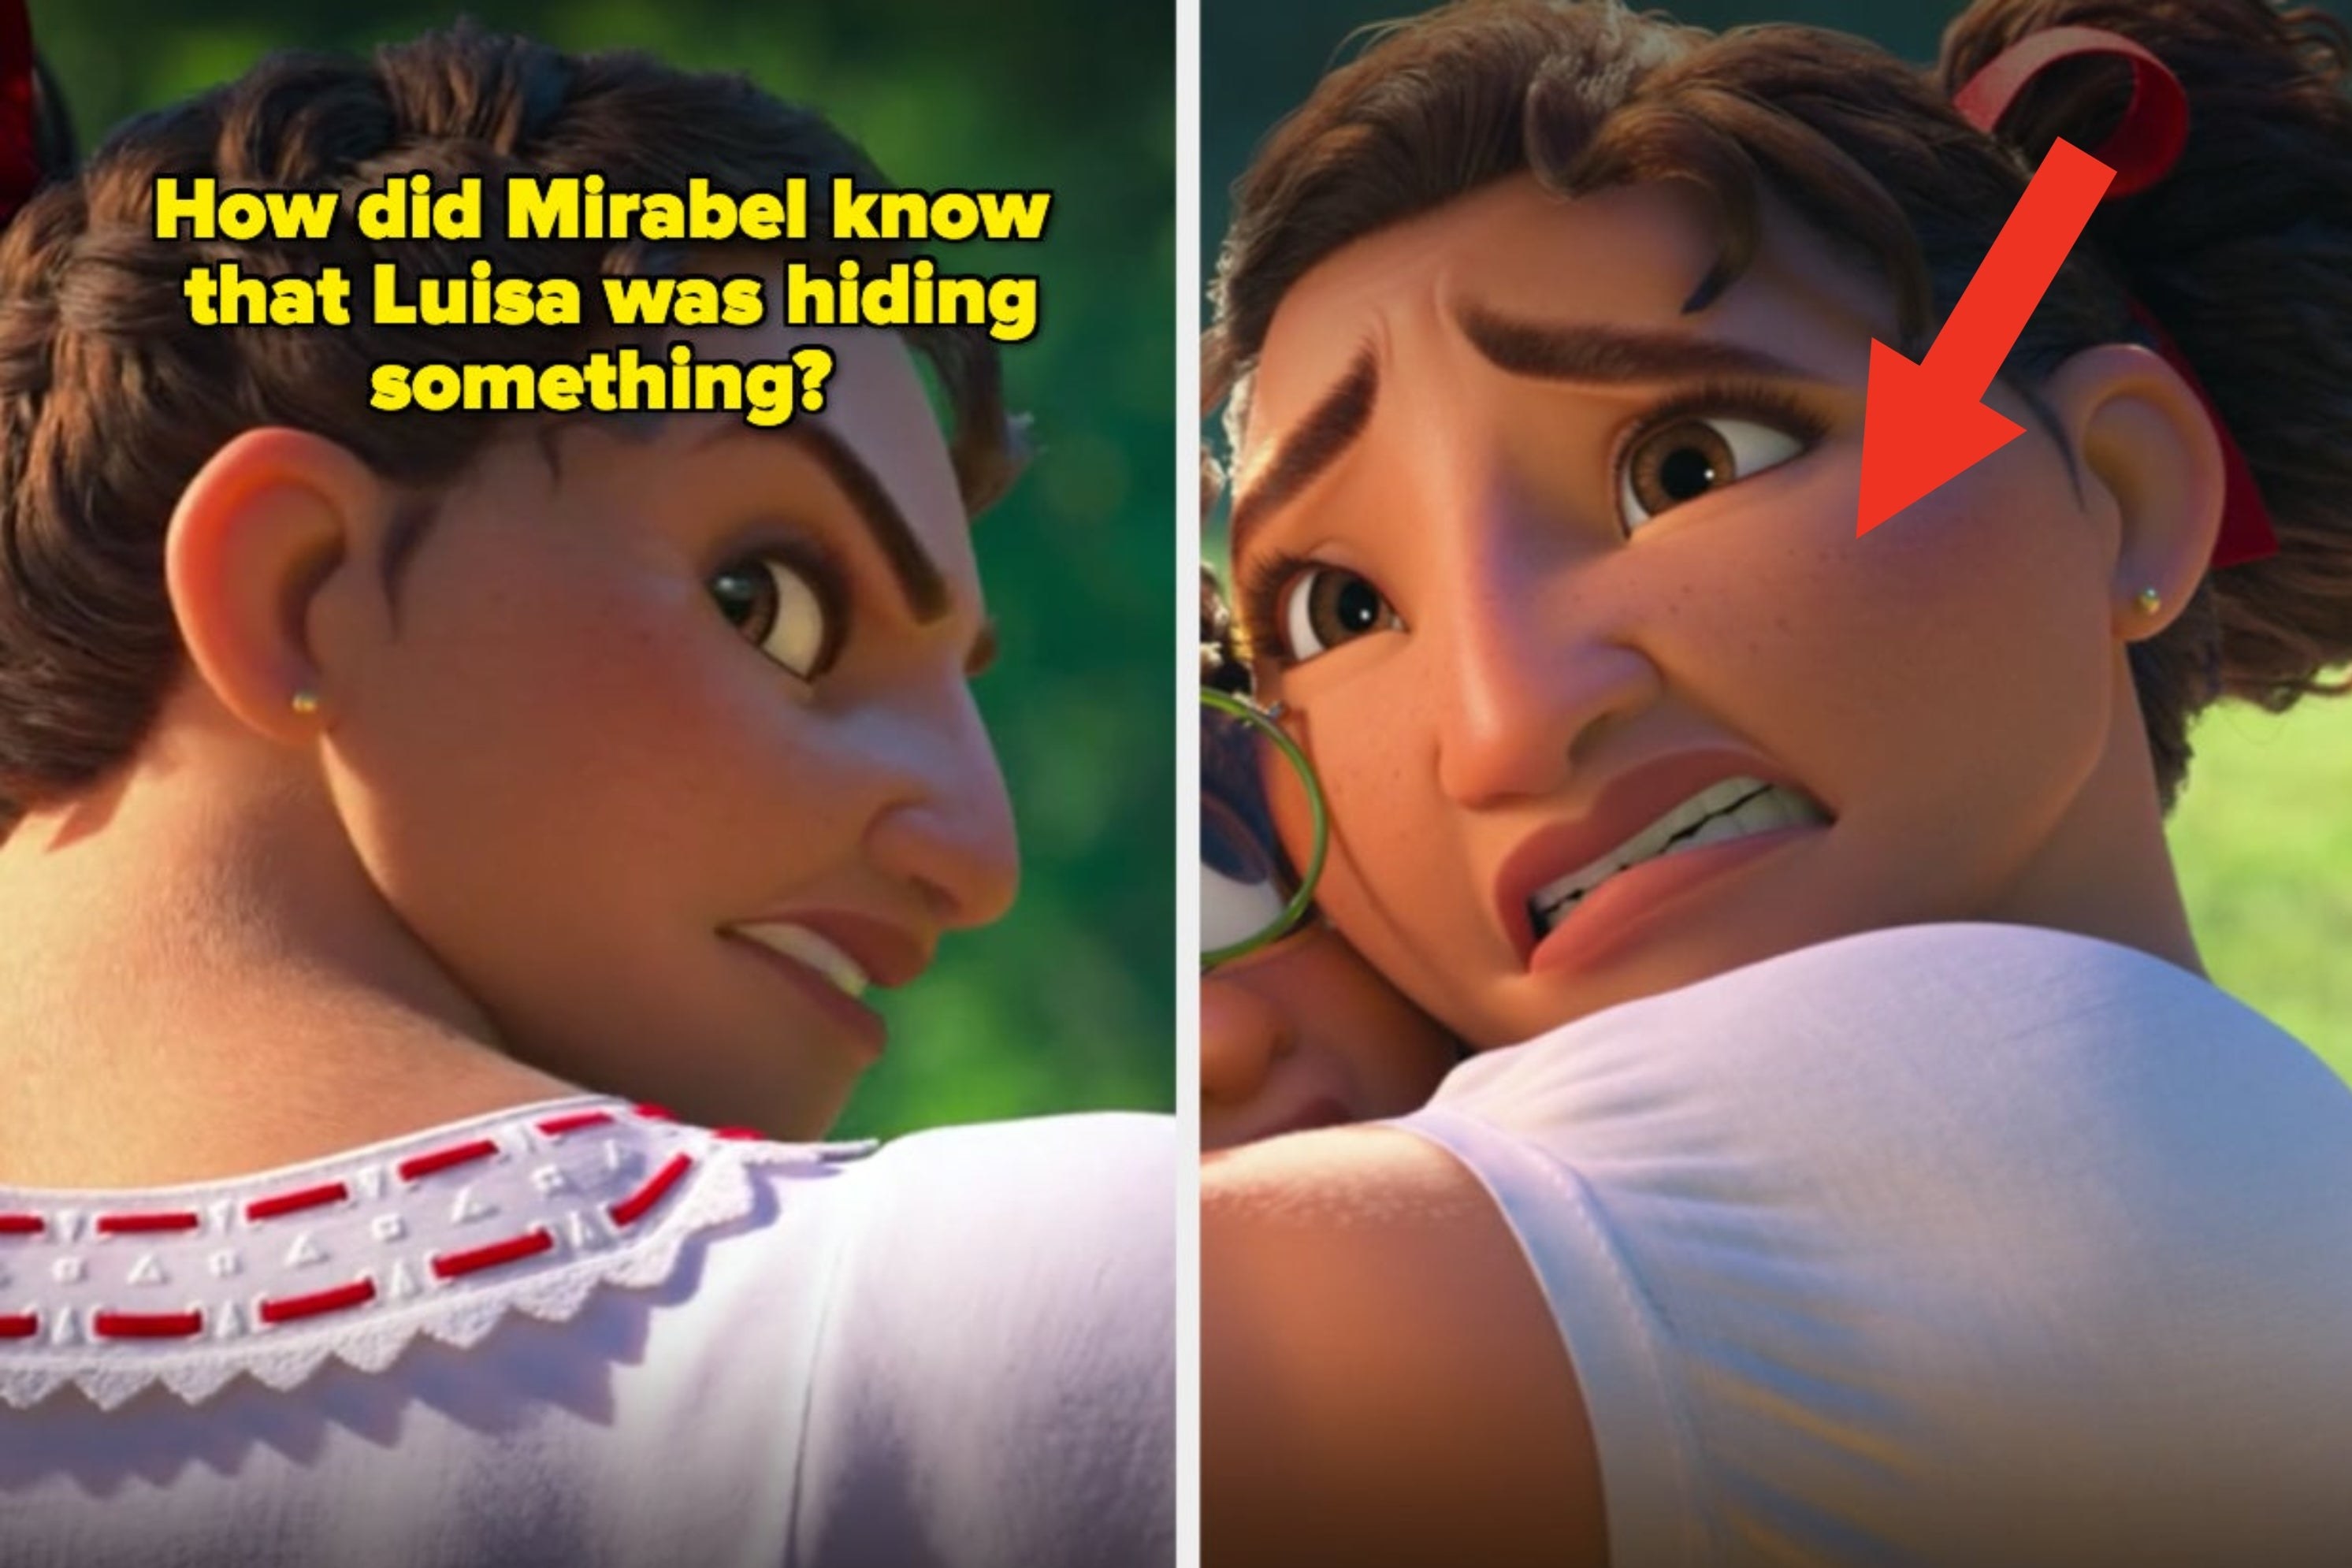 Two images of Luisa with the question, &quot;How did Mirabel know that Luisa was hiding something?&quot;